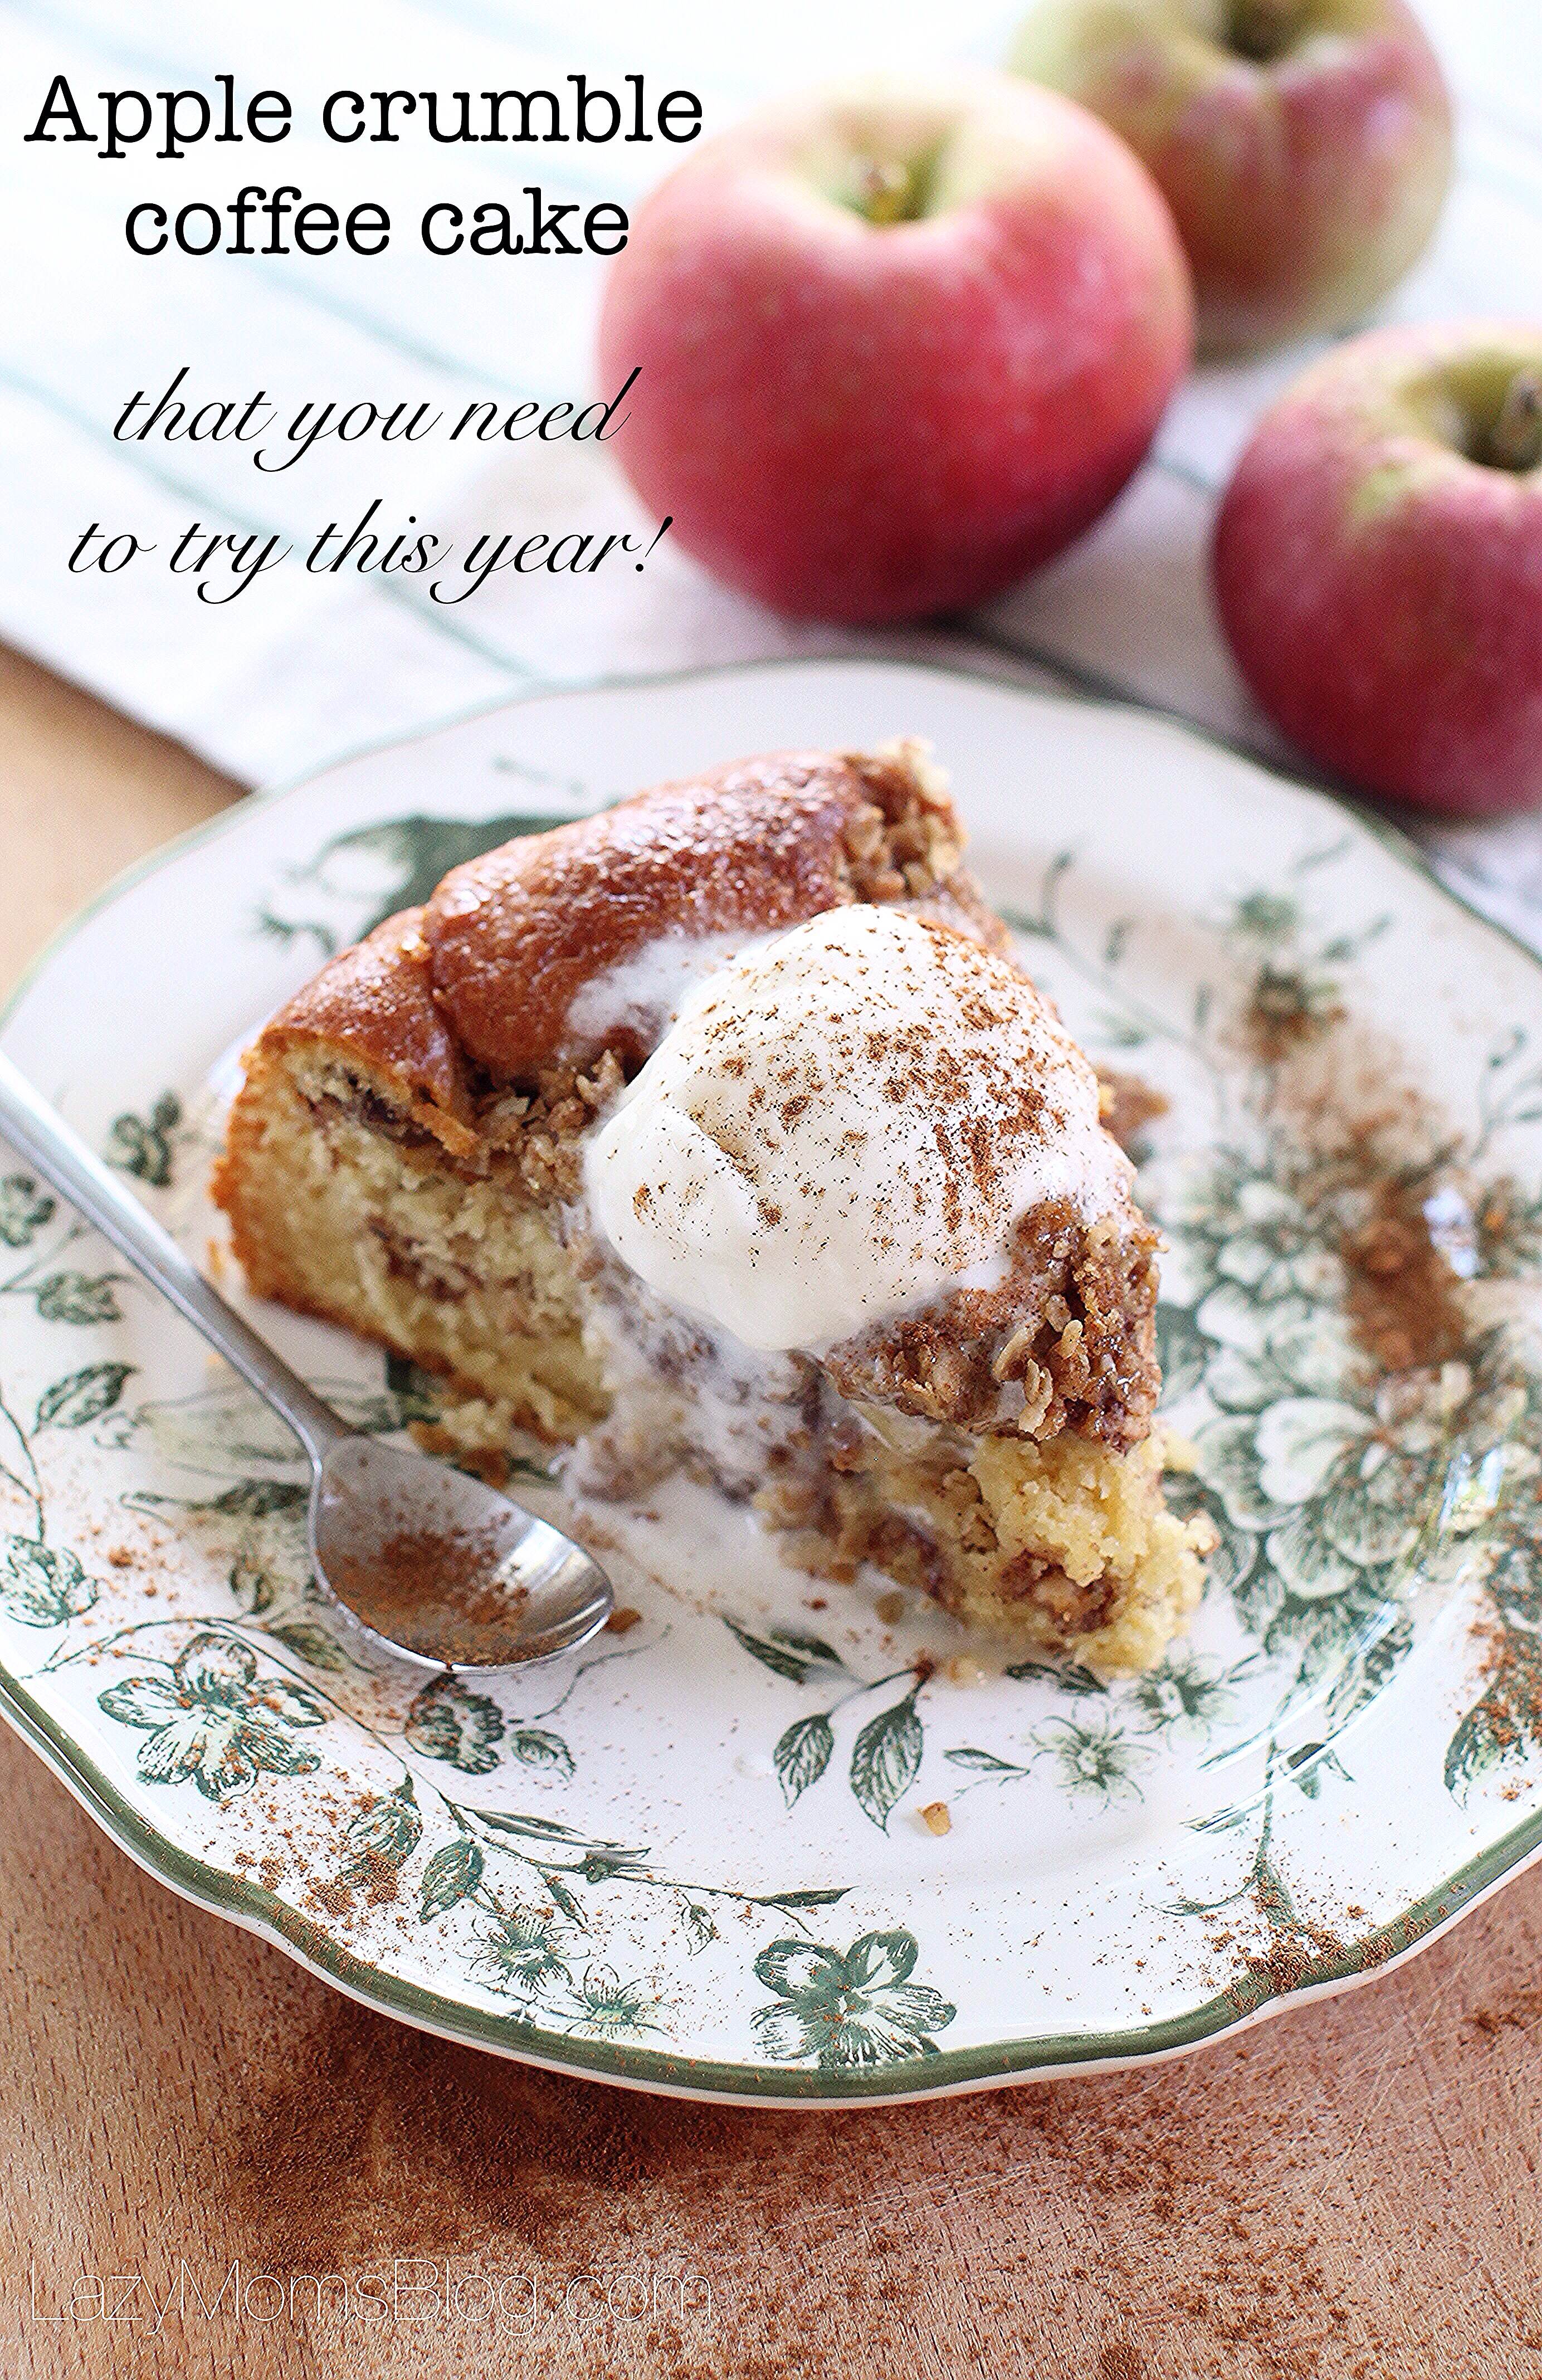 this is hands down the best fall desert ever! Such an amazing cake, full of flavor, and smelling amazing too! #fall, #apple #coffeecake  